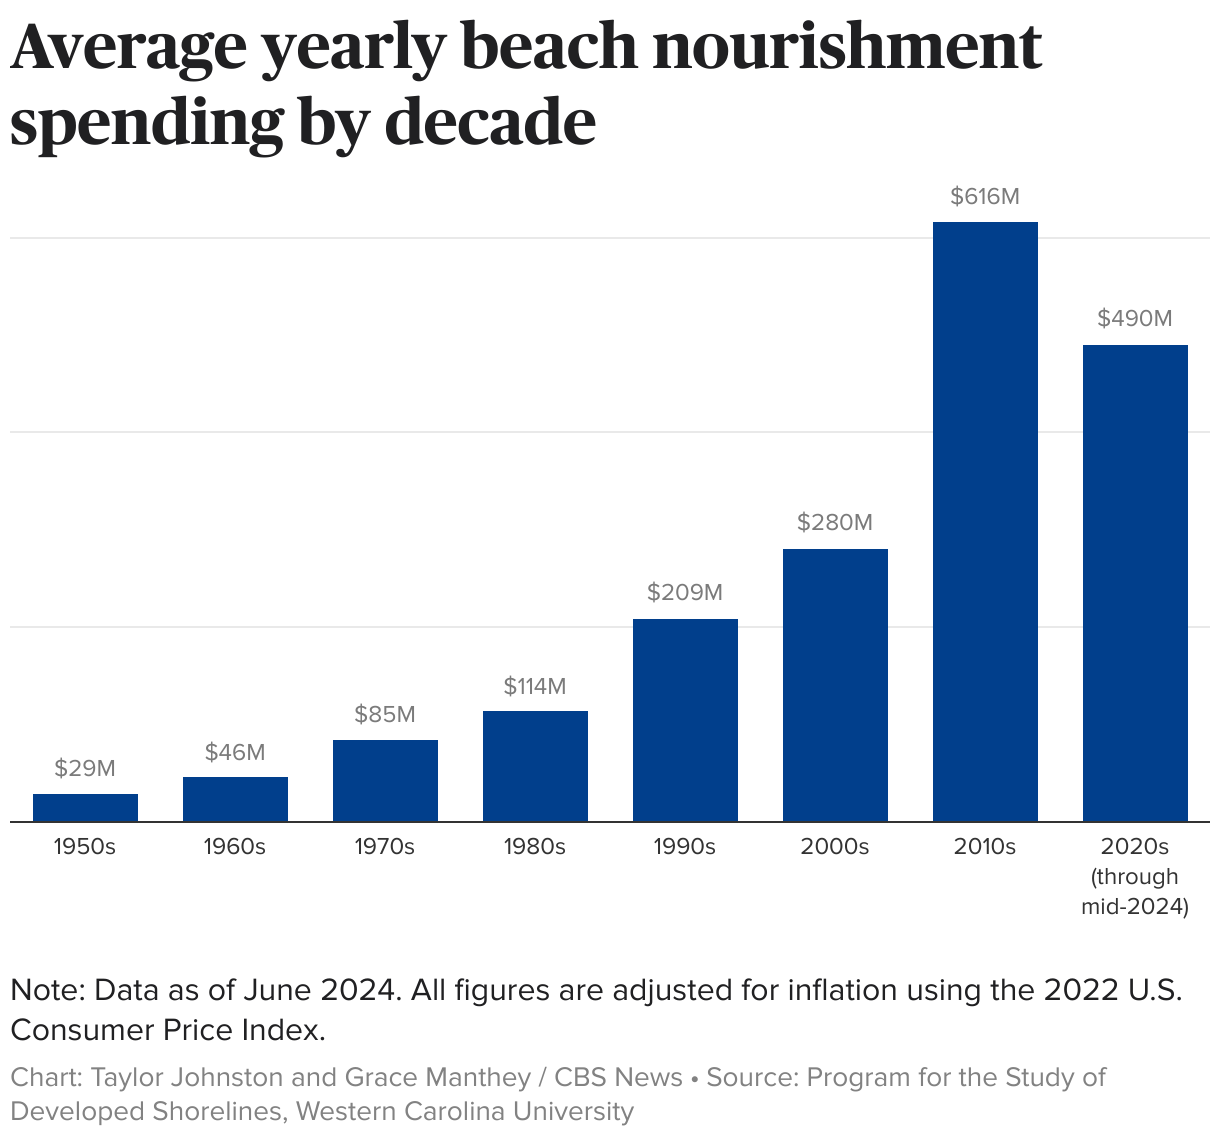 Bar chart showing average yearly spending on beach nourishment projects.